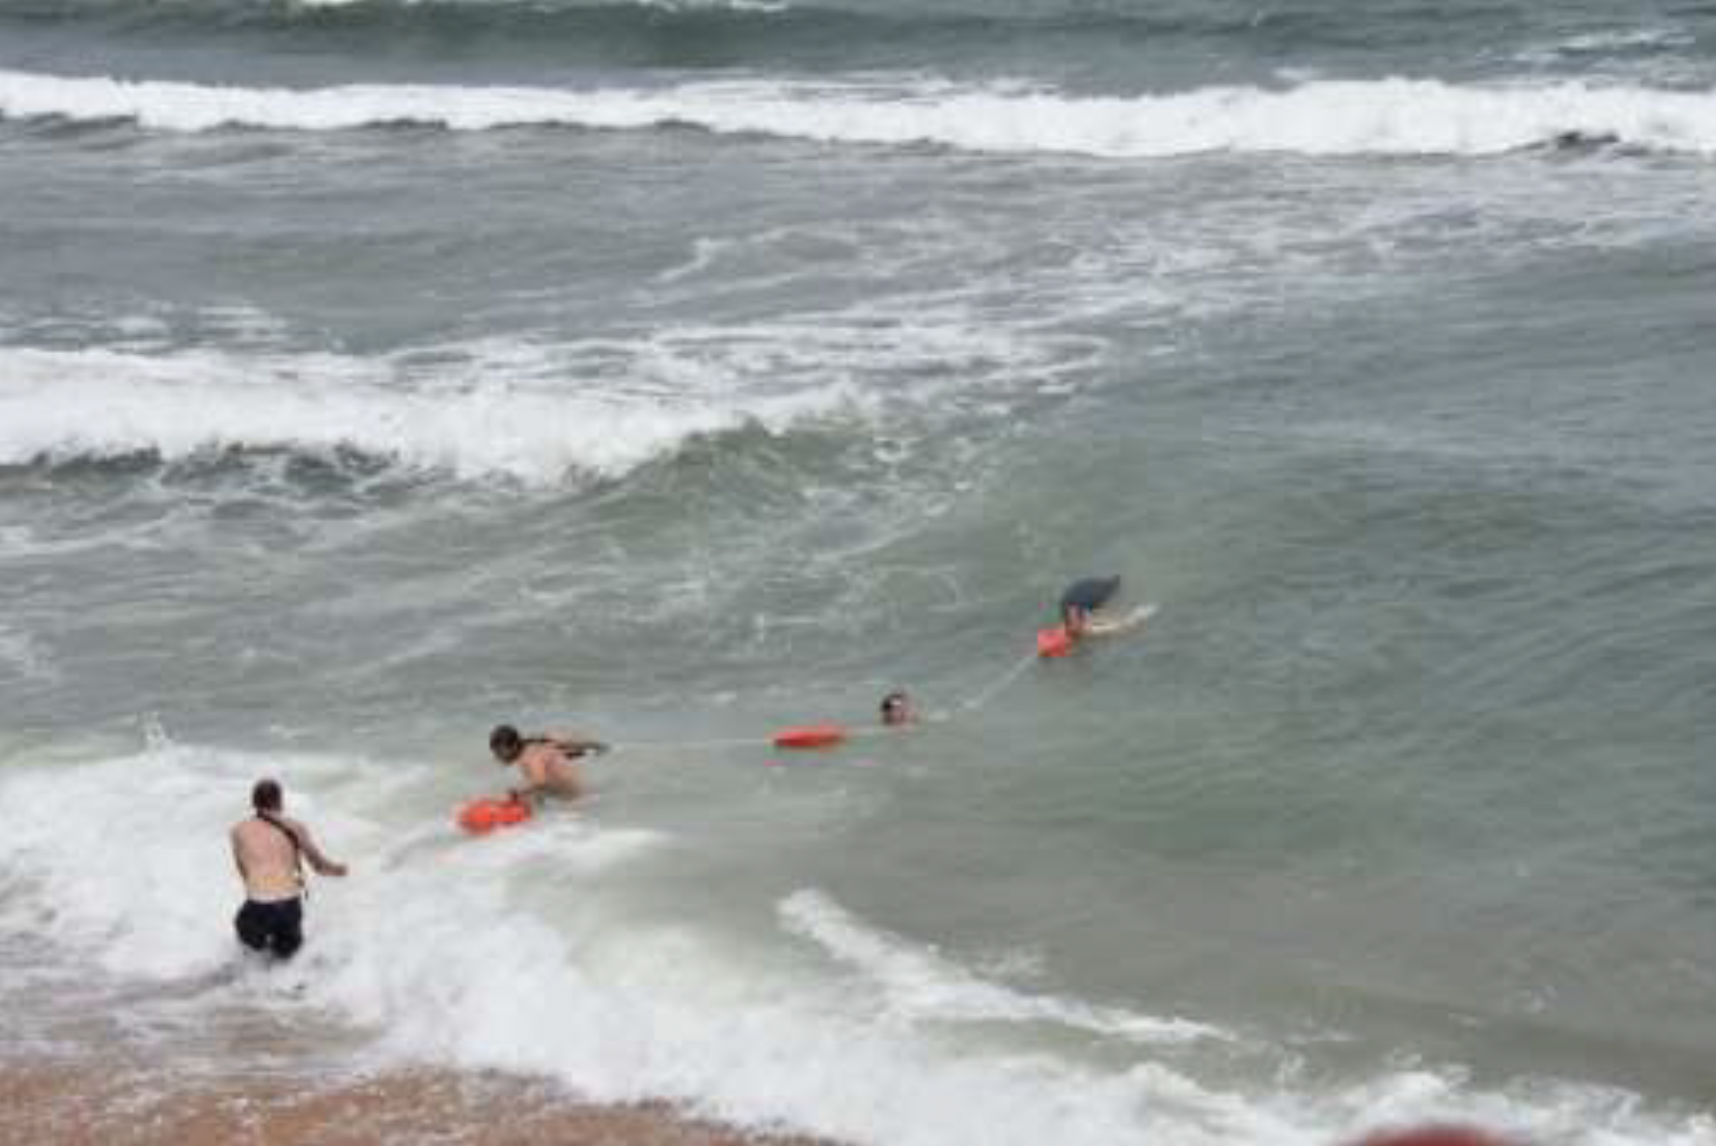 Lifeguards form a human chain to rescue a woman caught in a rip current, visible here running perpendicular to the breakers. Image courtesy of the city of Flagler Beach